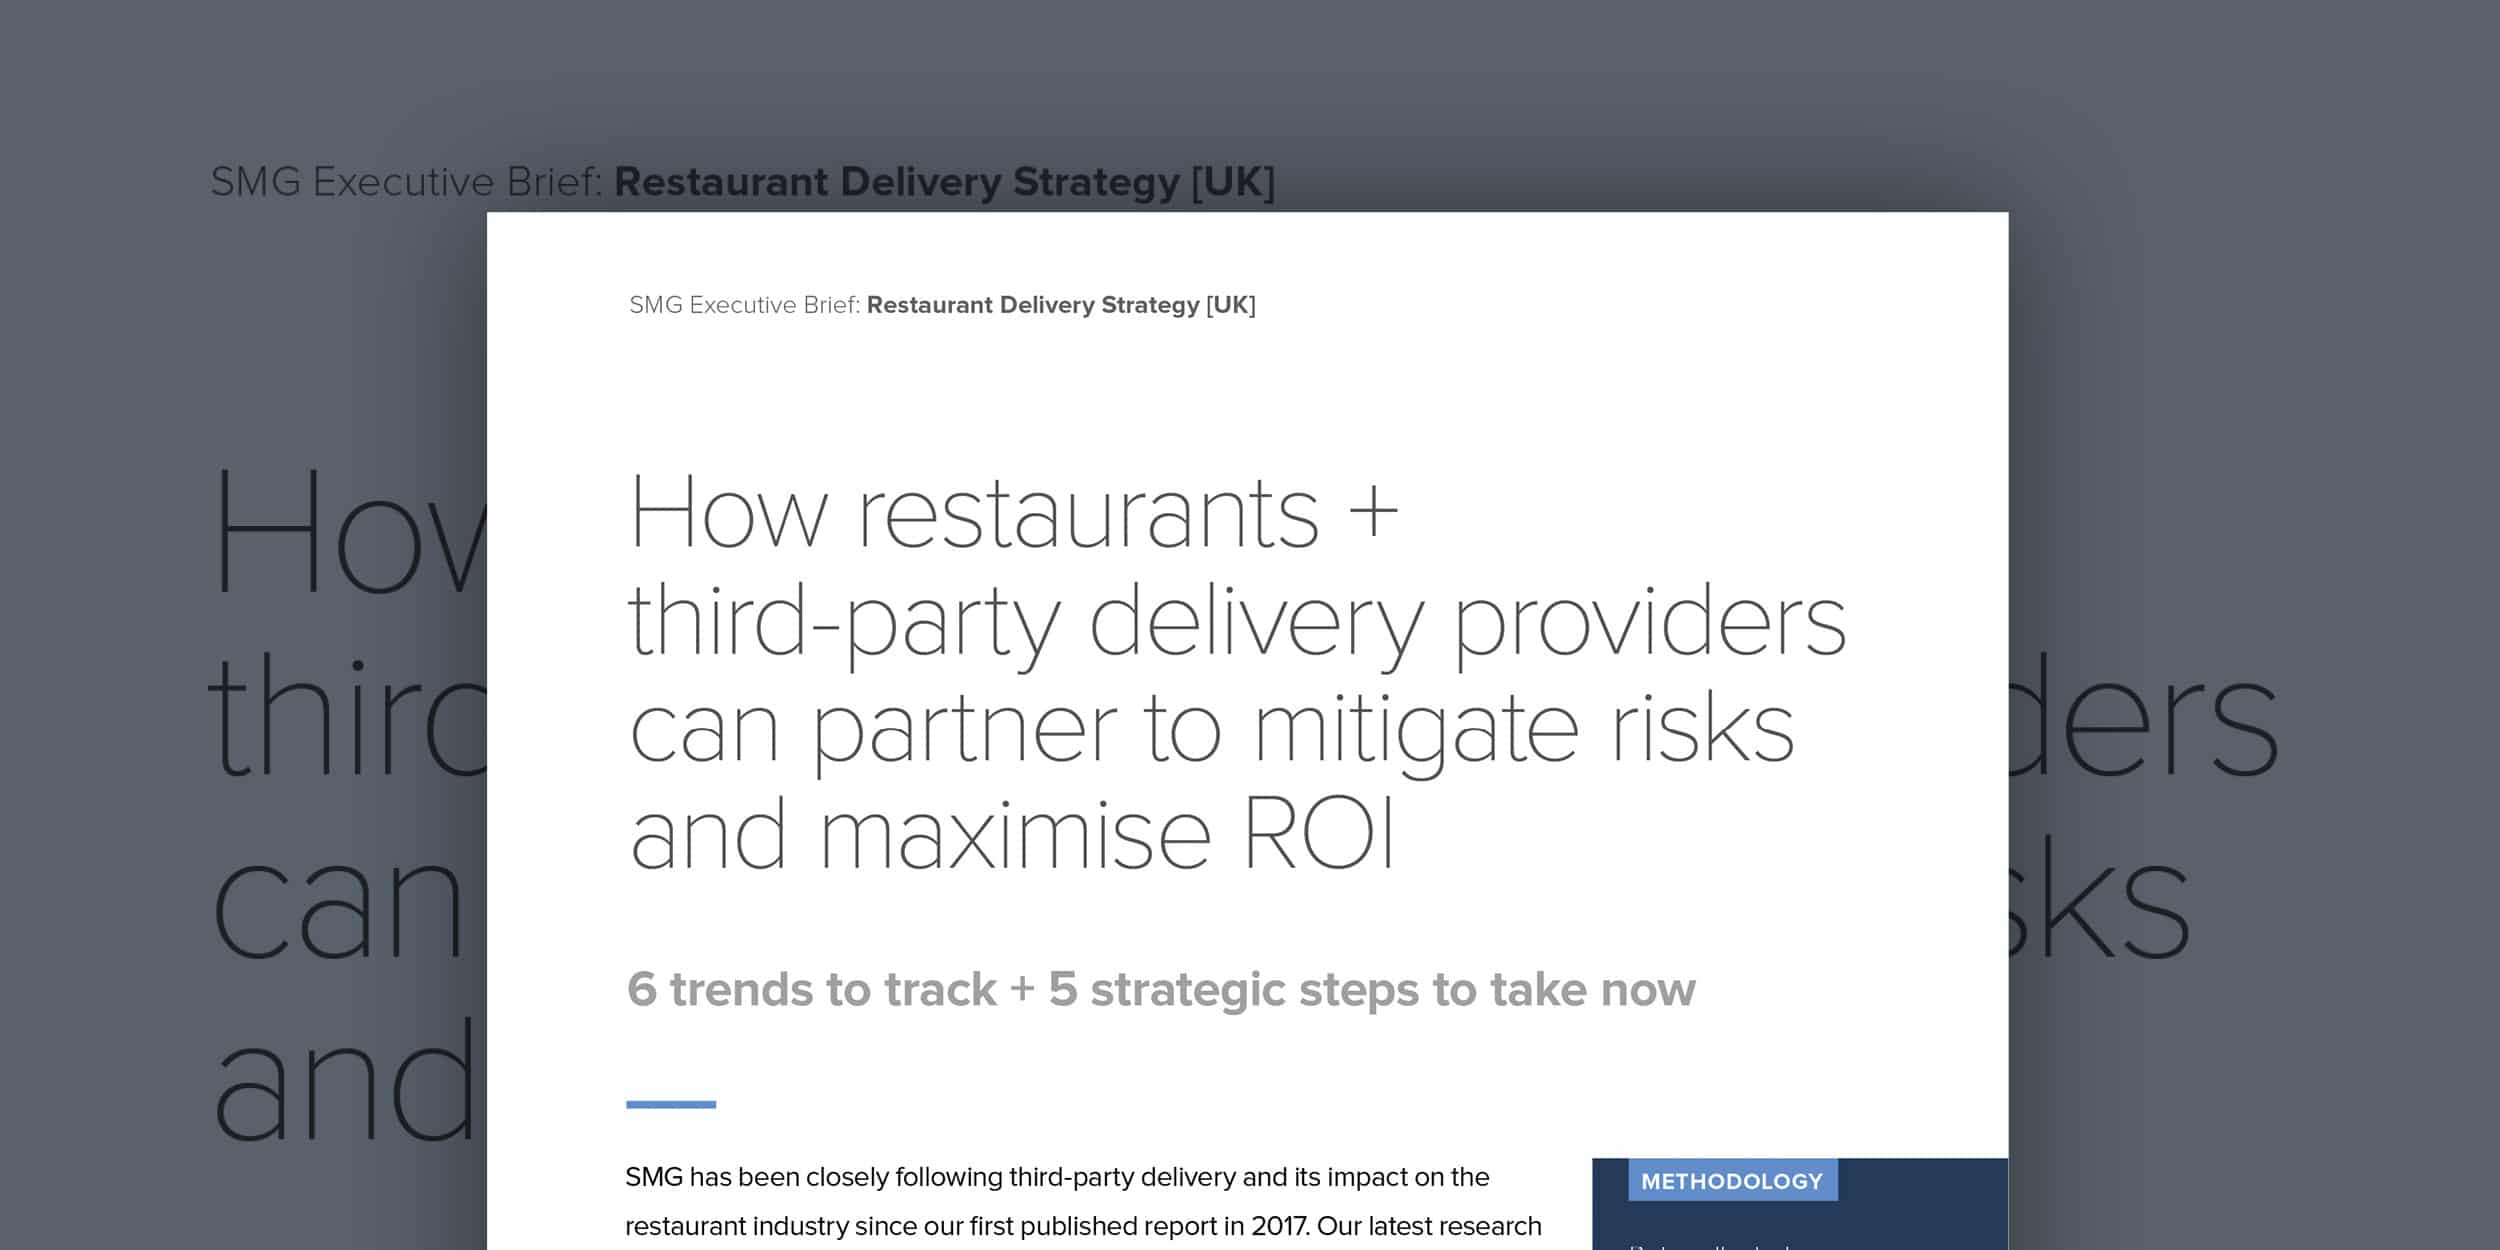 How restaurants + third-party delivery providers can partner to mitigate risks and maximize ROI